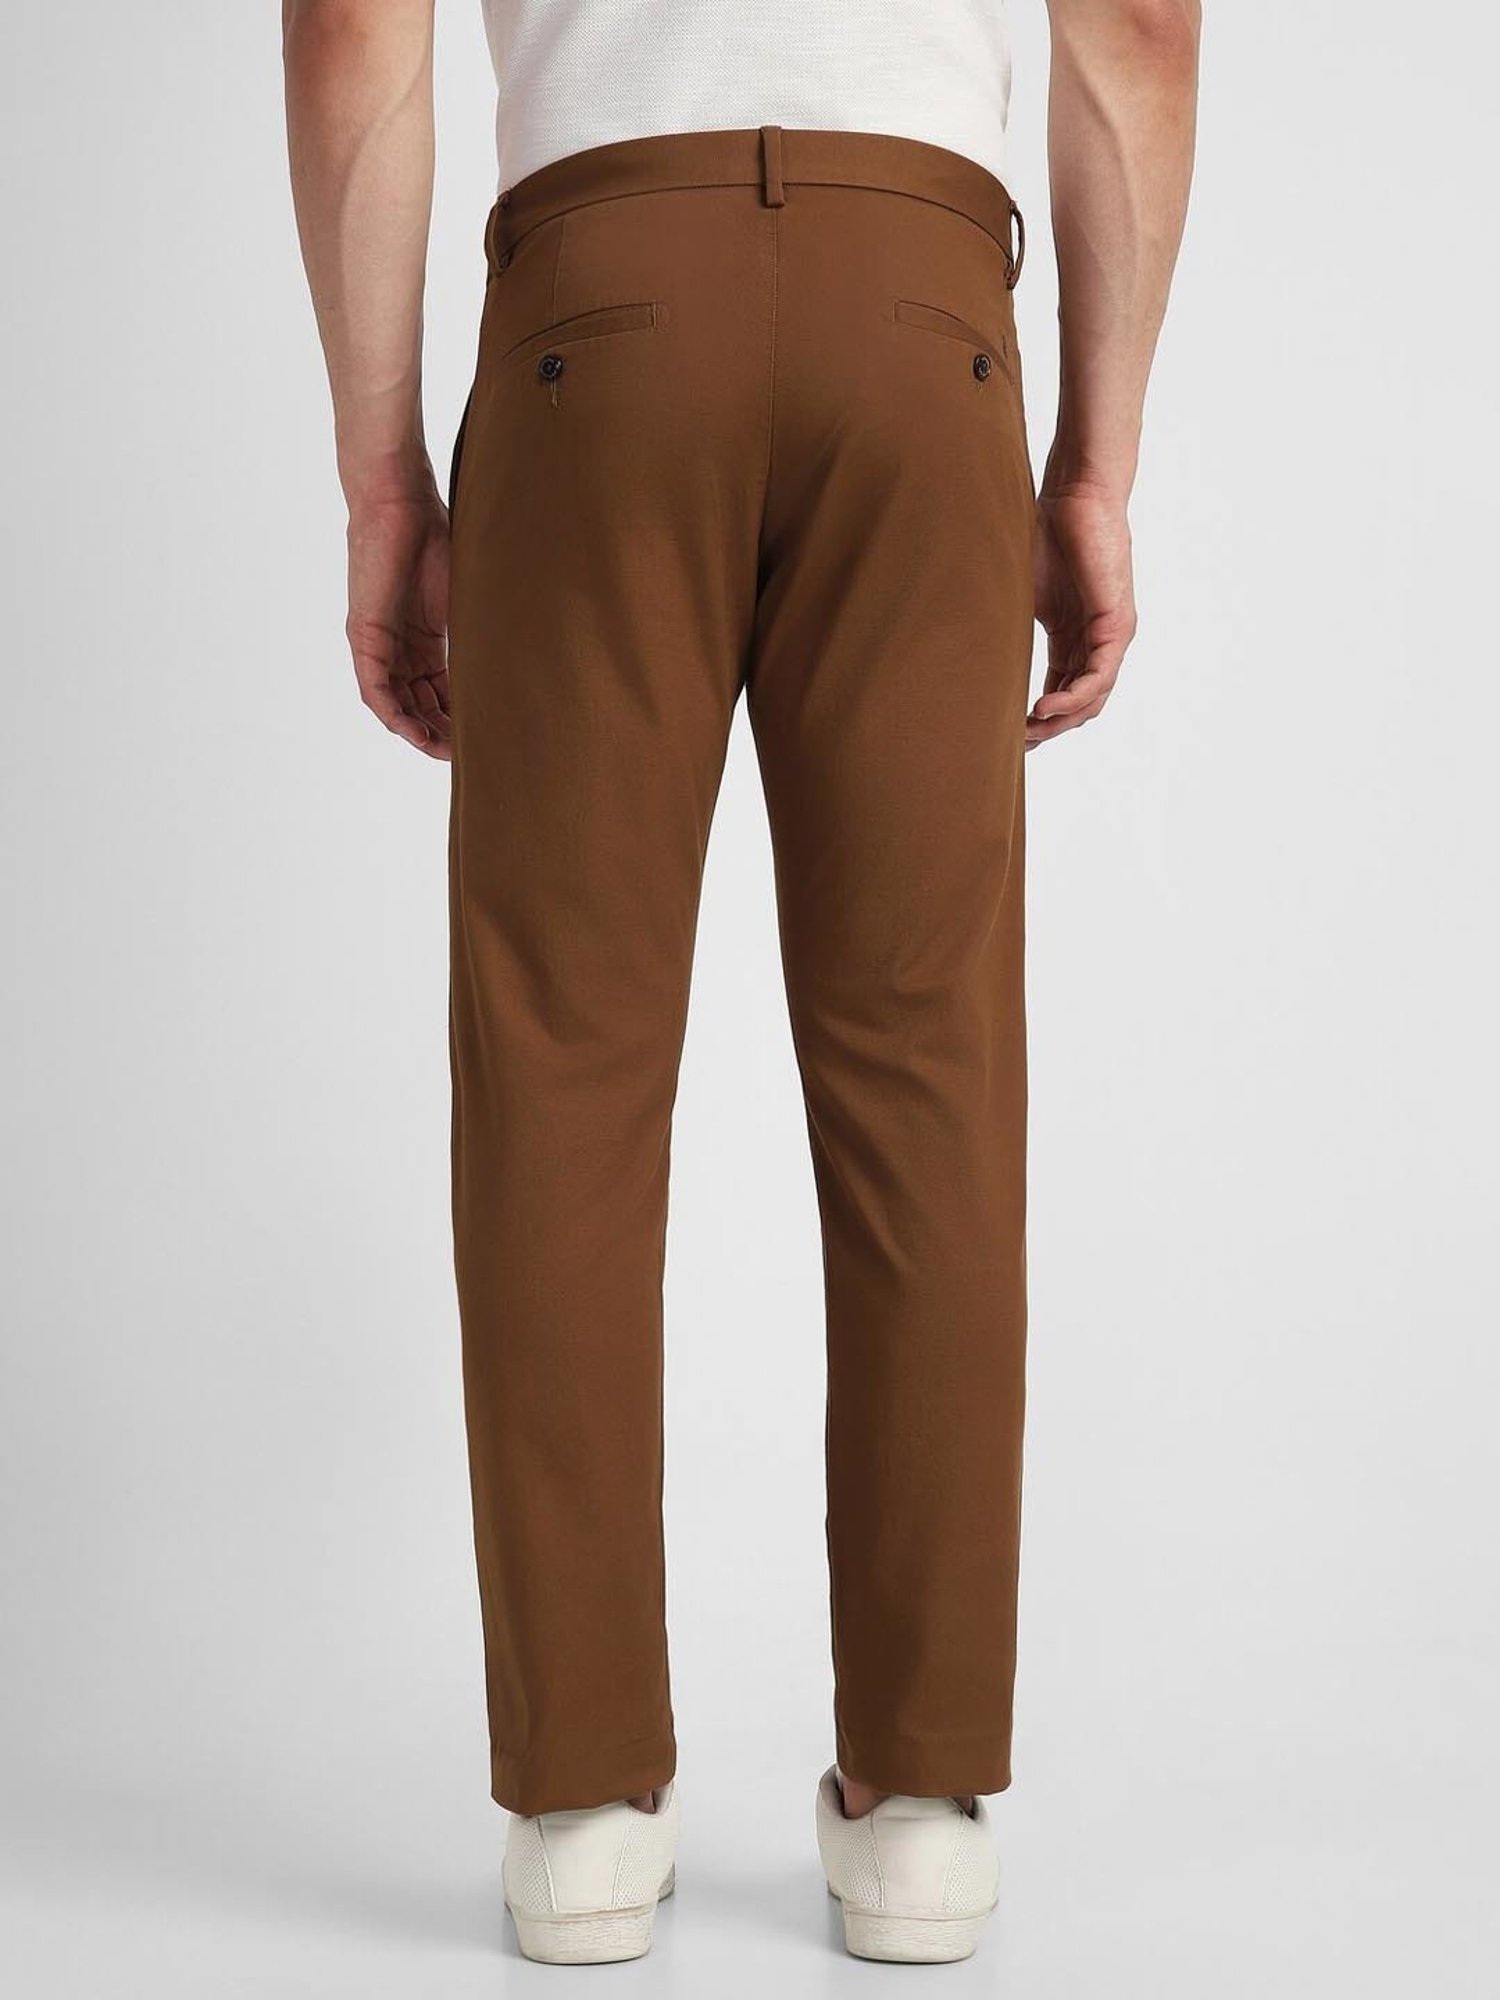 Buy Brown Trousers & Pants for Women by ALLEN SOLLY Online | Ajio.com